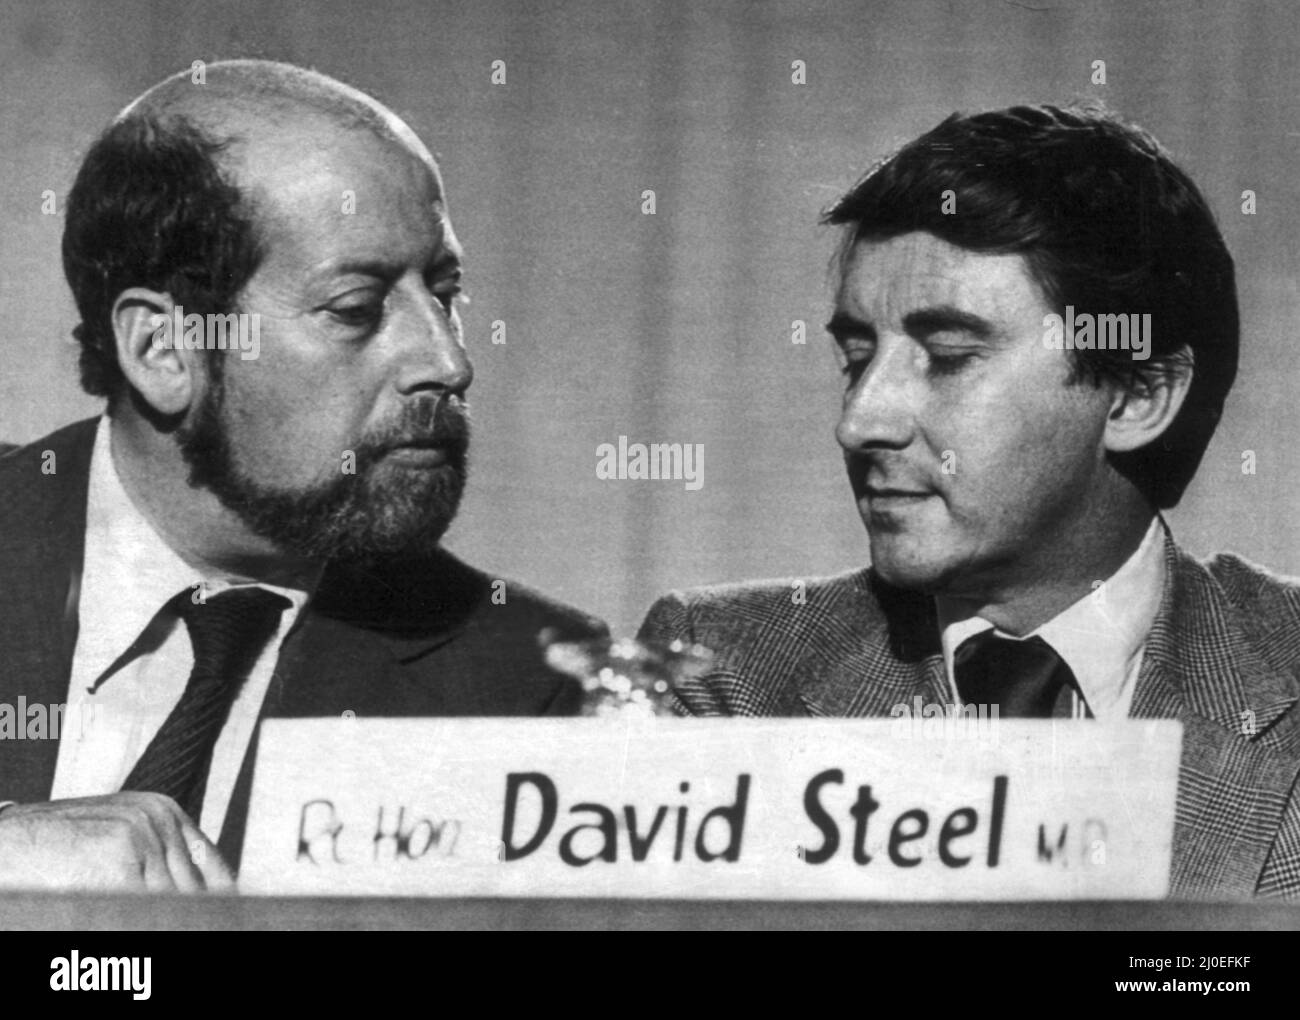 Clement Freud MP for the Isle of Ely seen here on the rostrum at the Liberal Party conference with David Steel 14th September 1978 *** Local Caption *** Watscan -  - 16/04/2009 Stock Photo